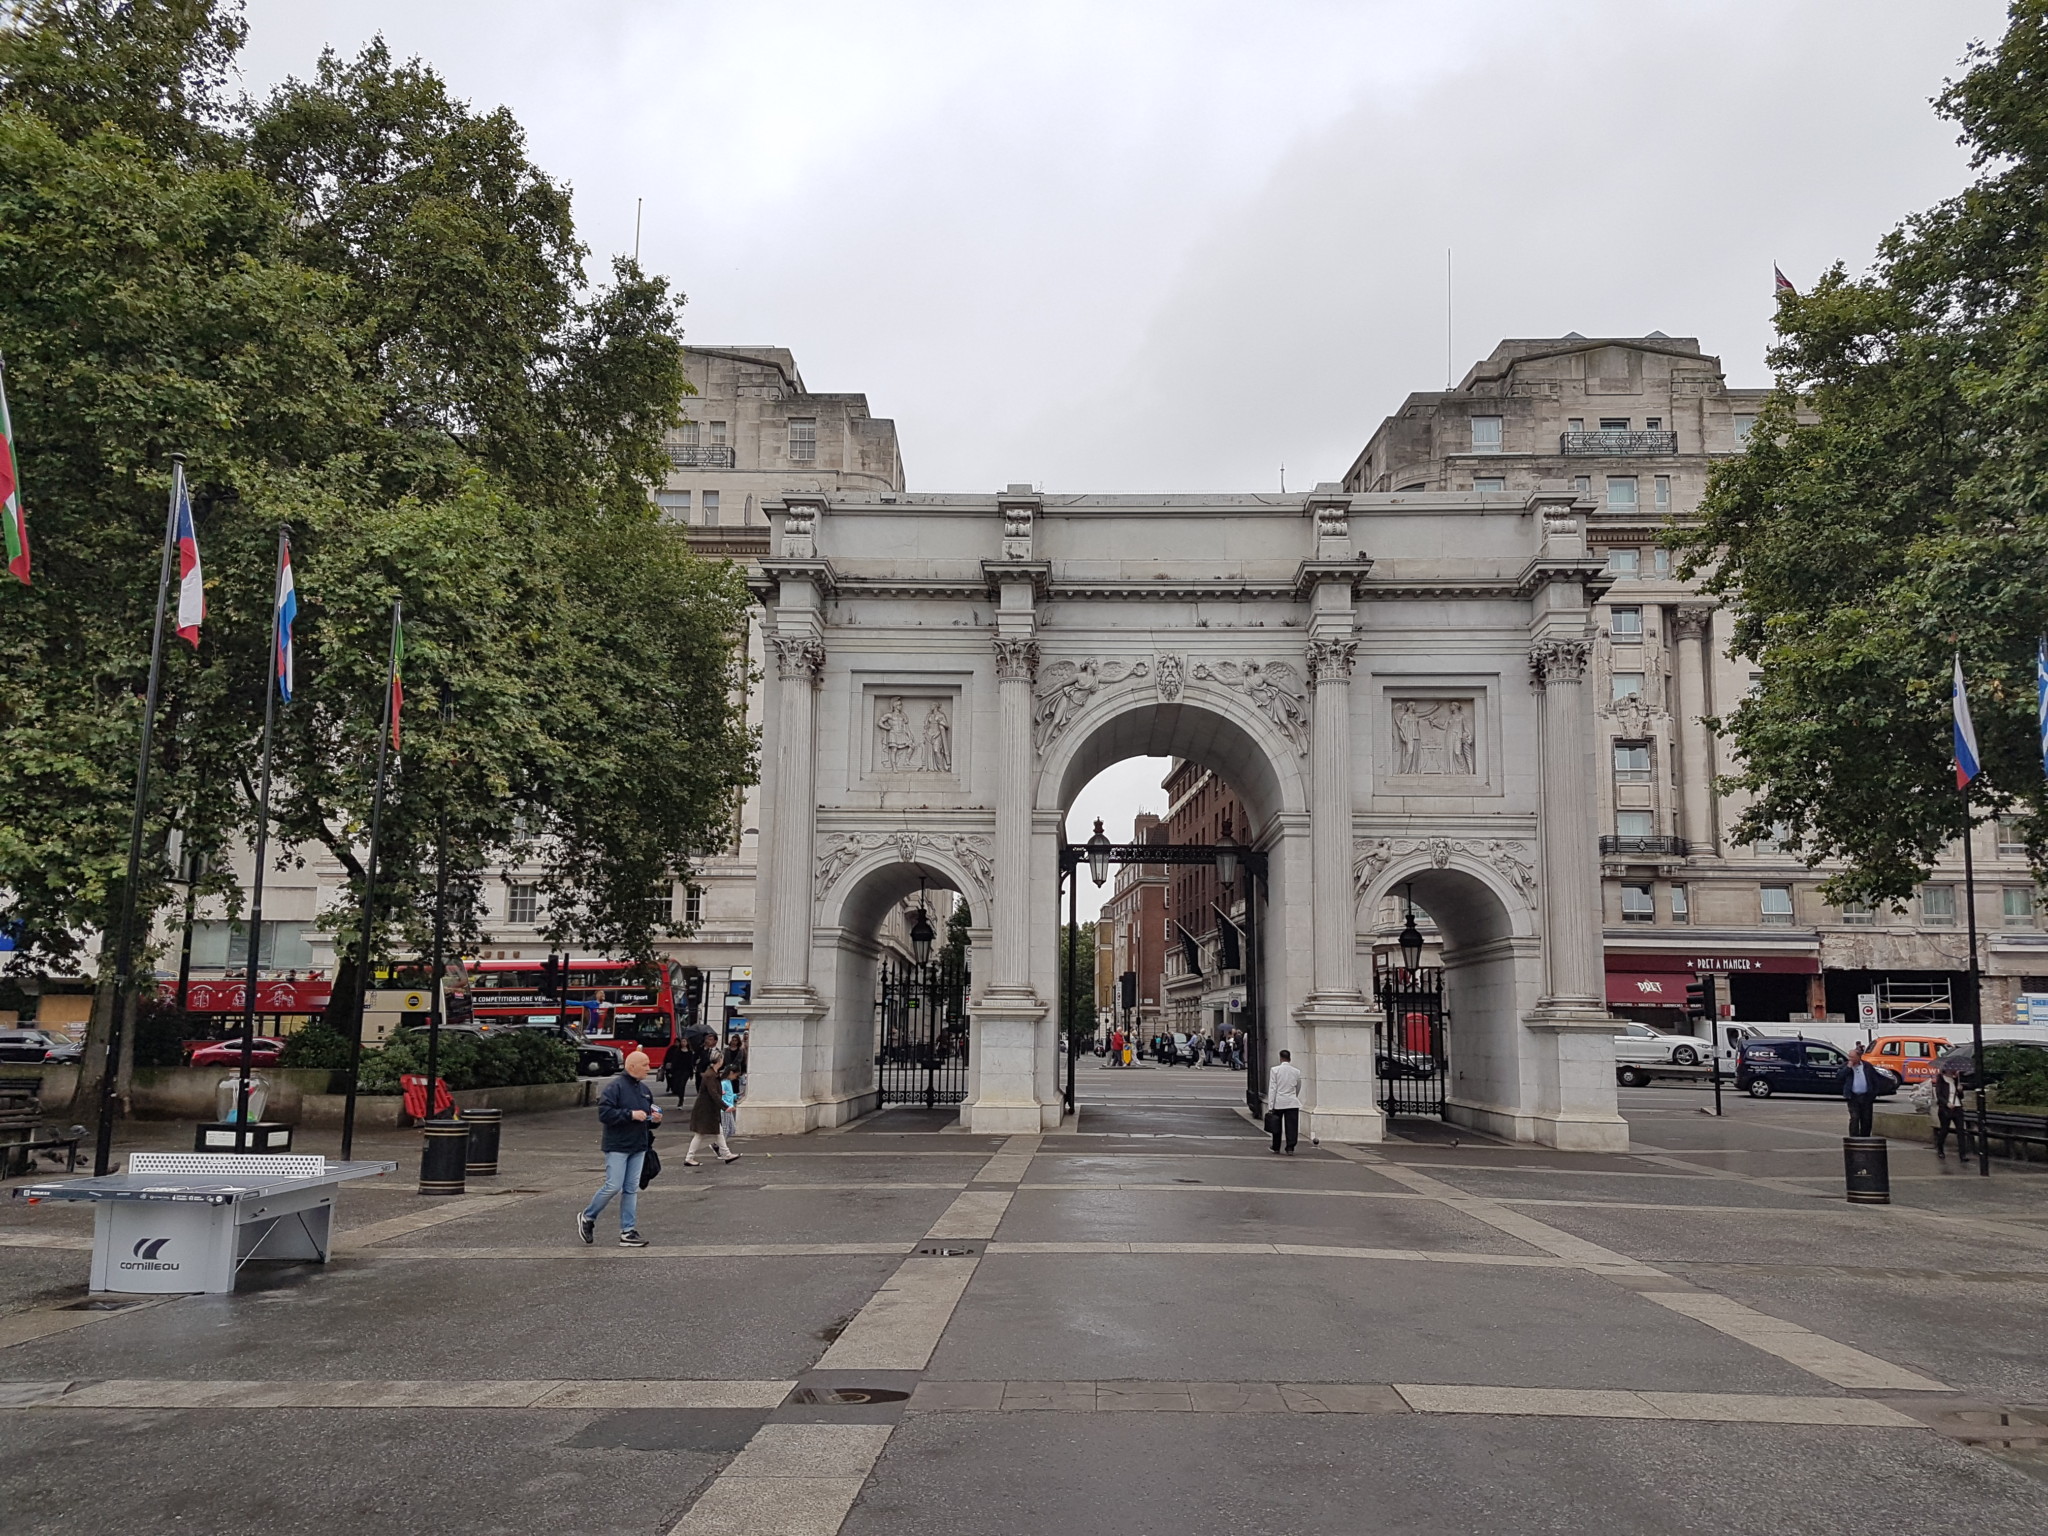 Marble Arch - Made out Of Marble